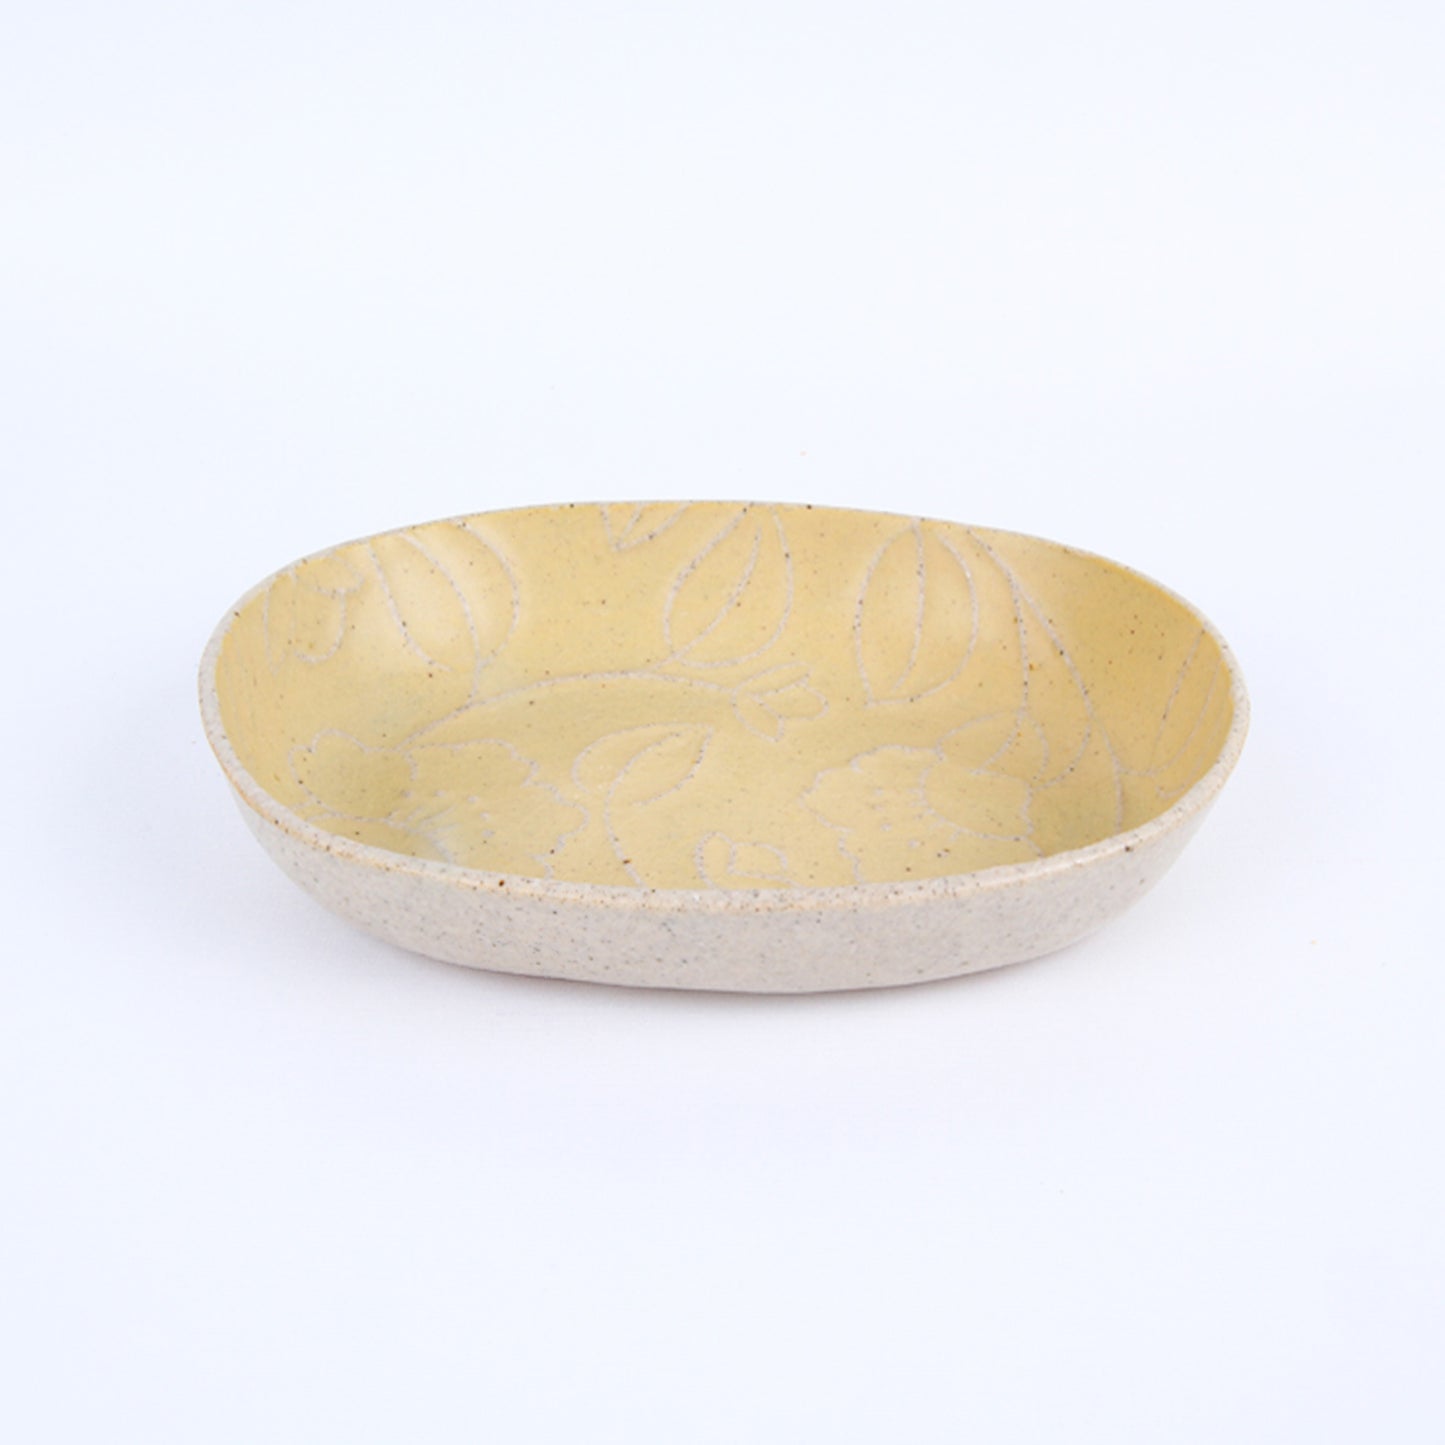 Refreshing Oval Plate 160mm (Pastel Mint Color)